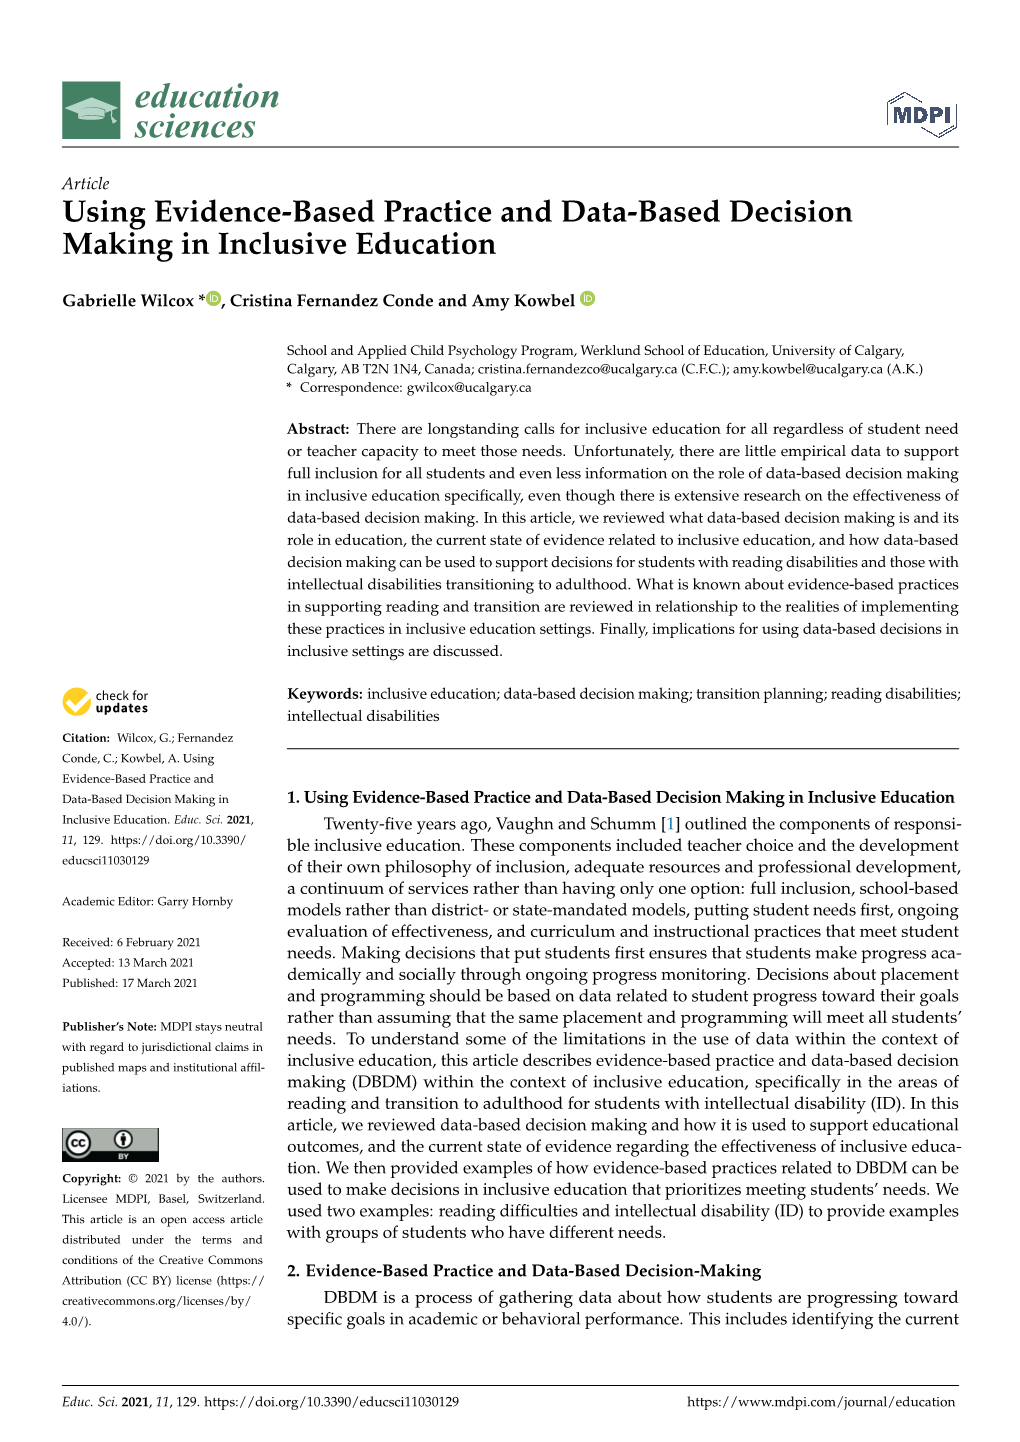 Using Evidence-Based Practice and Data-Based Decision Making in Inclusive Education